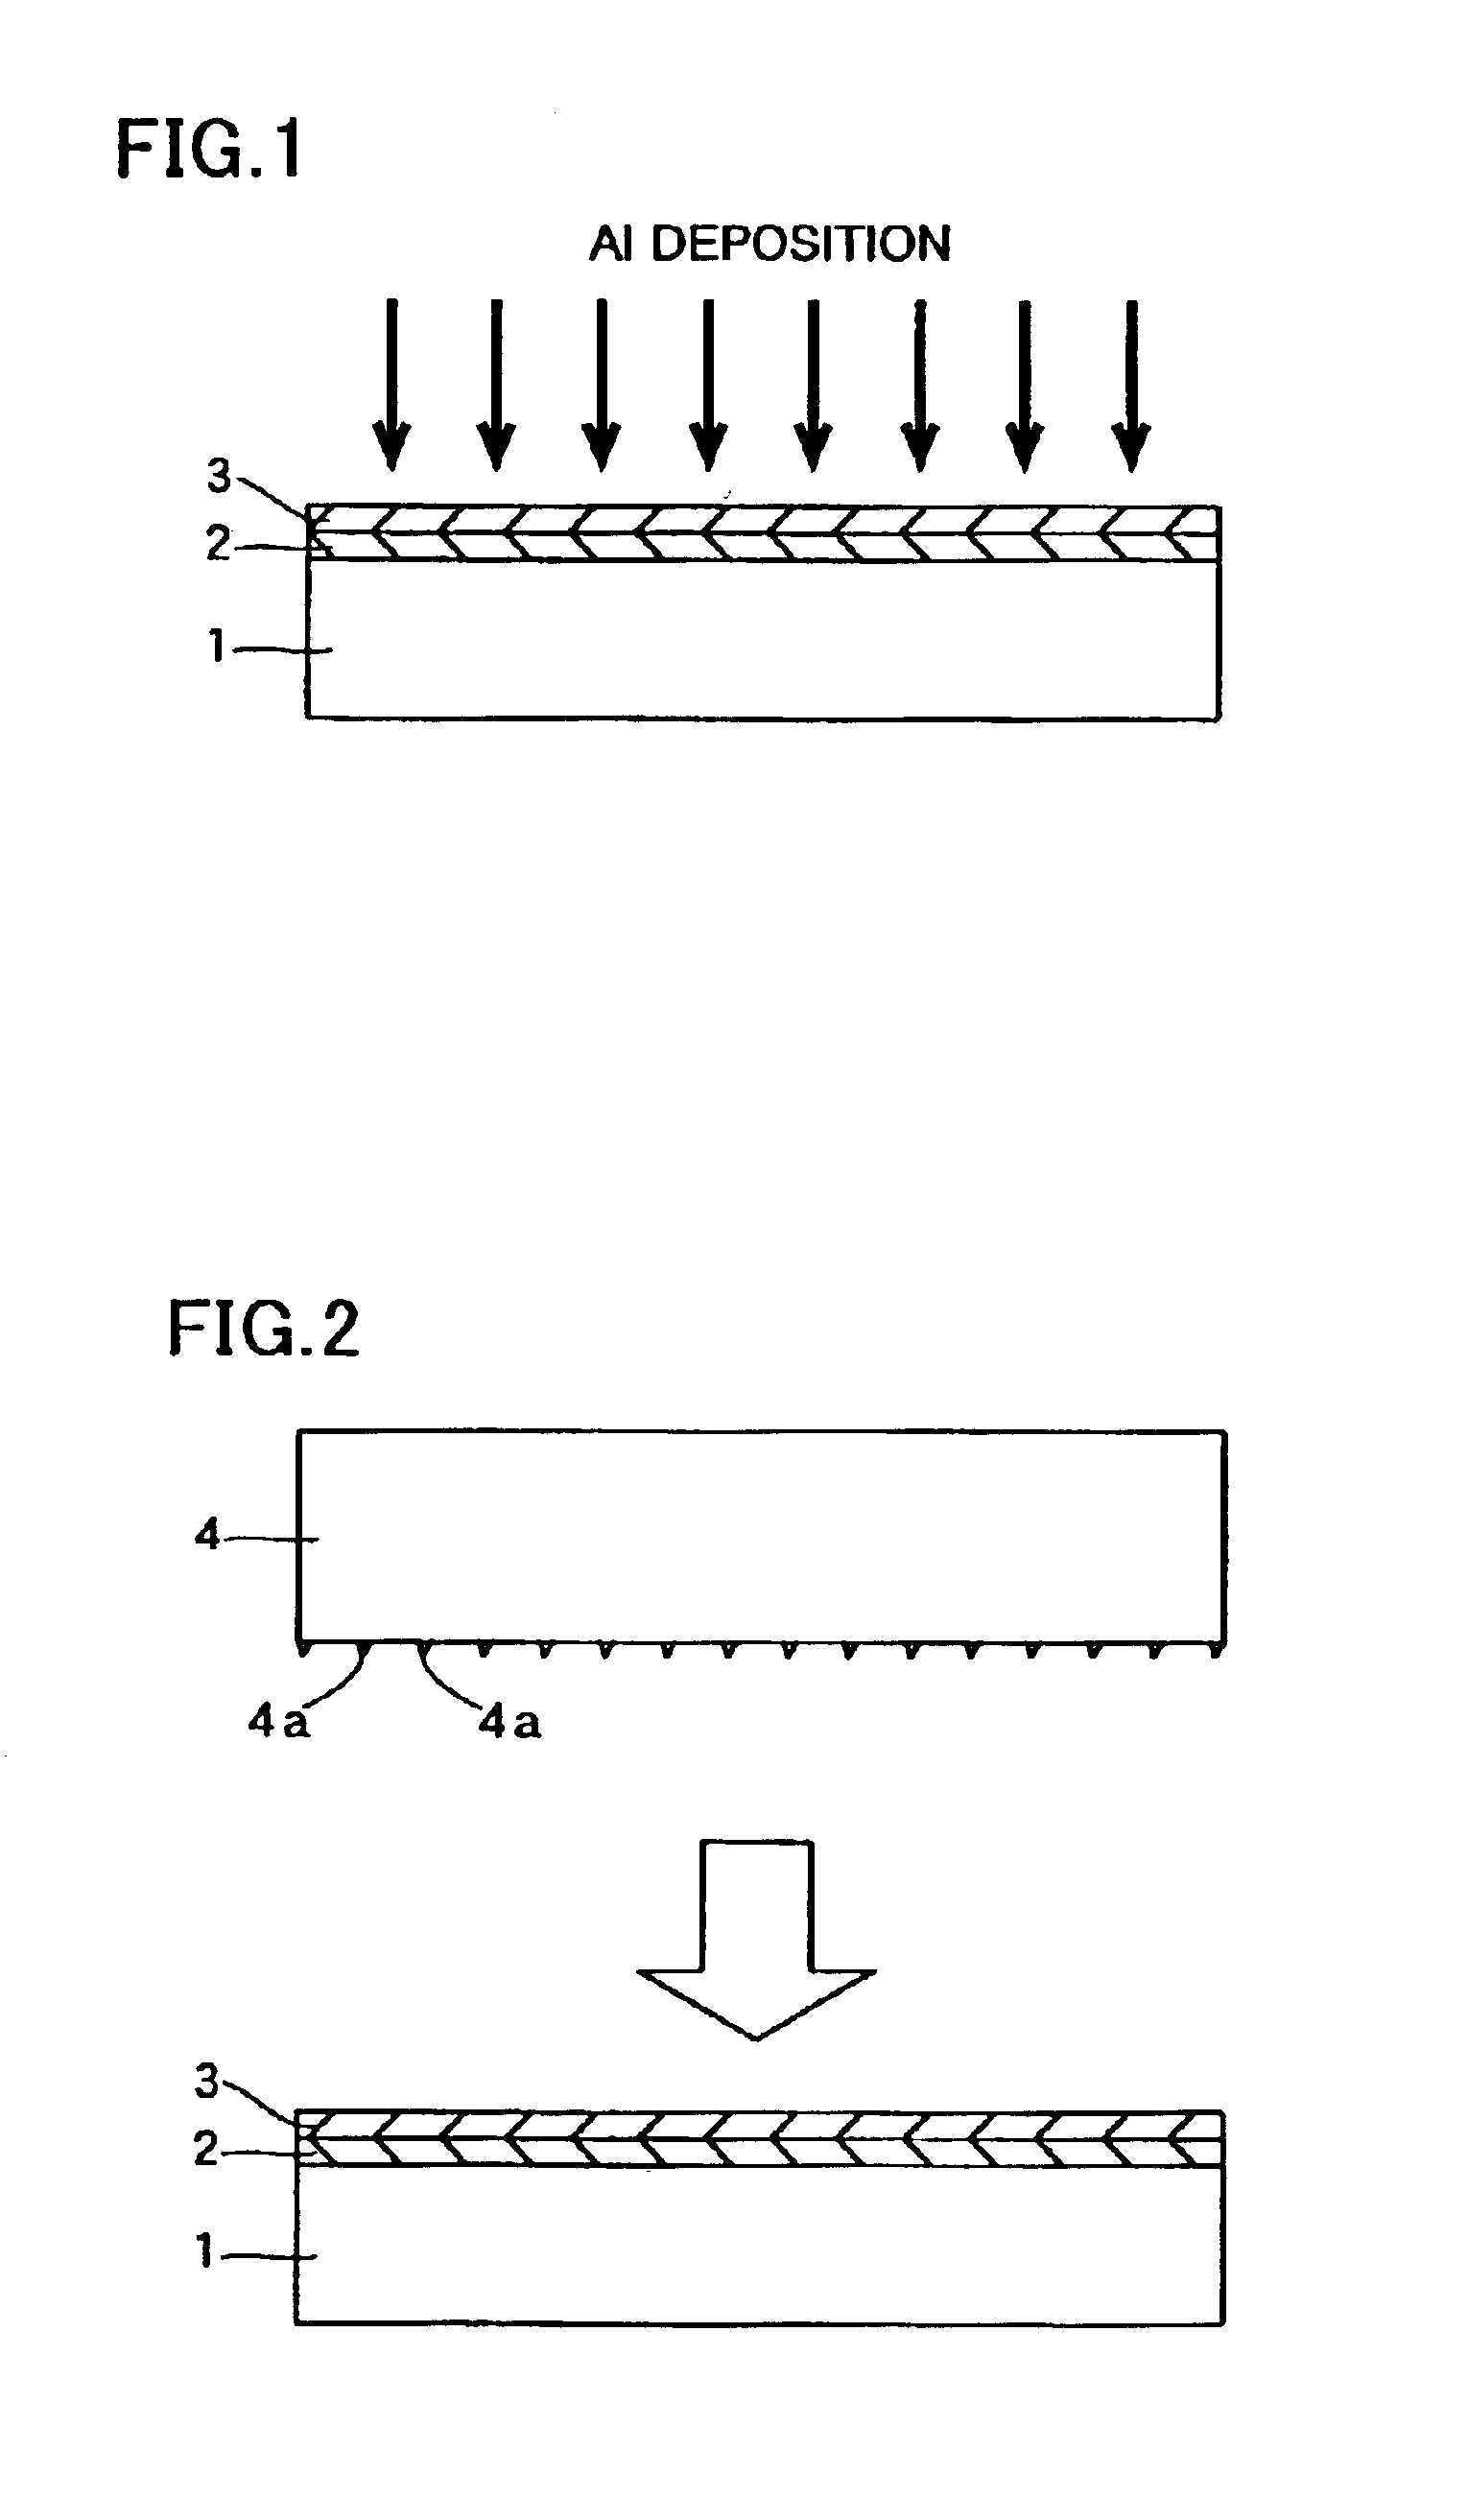 Method of forming grating microstructures by anodic oxidation